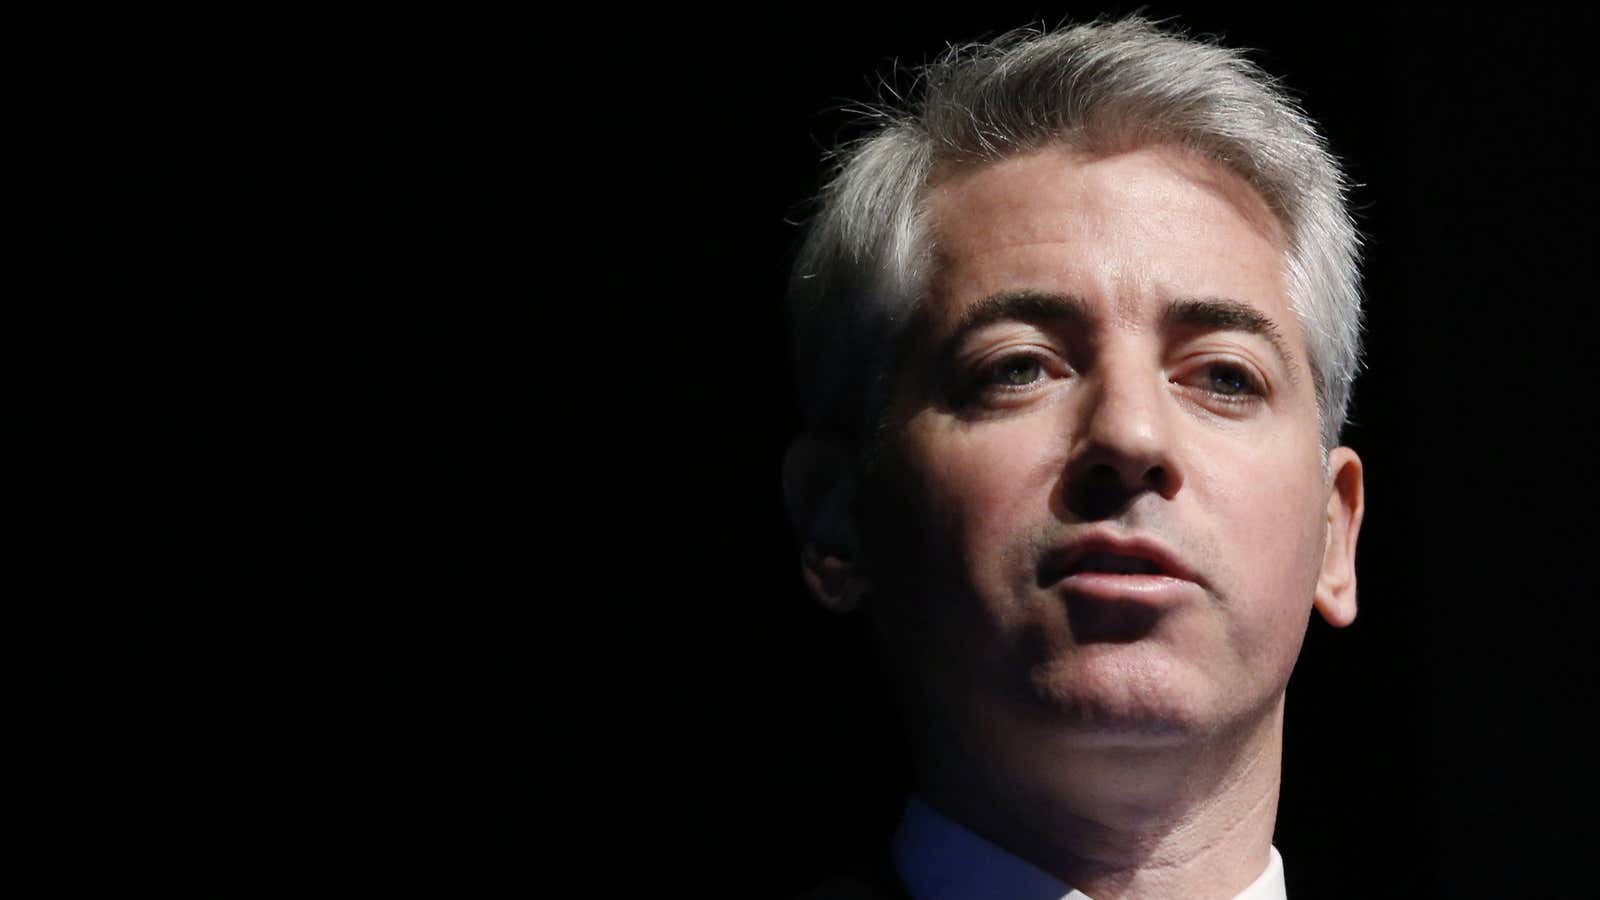 Despite his lobbying, Ackman is still a voice in the wilderness.